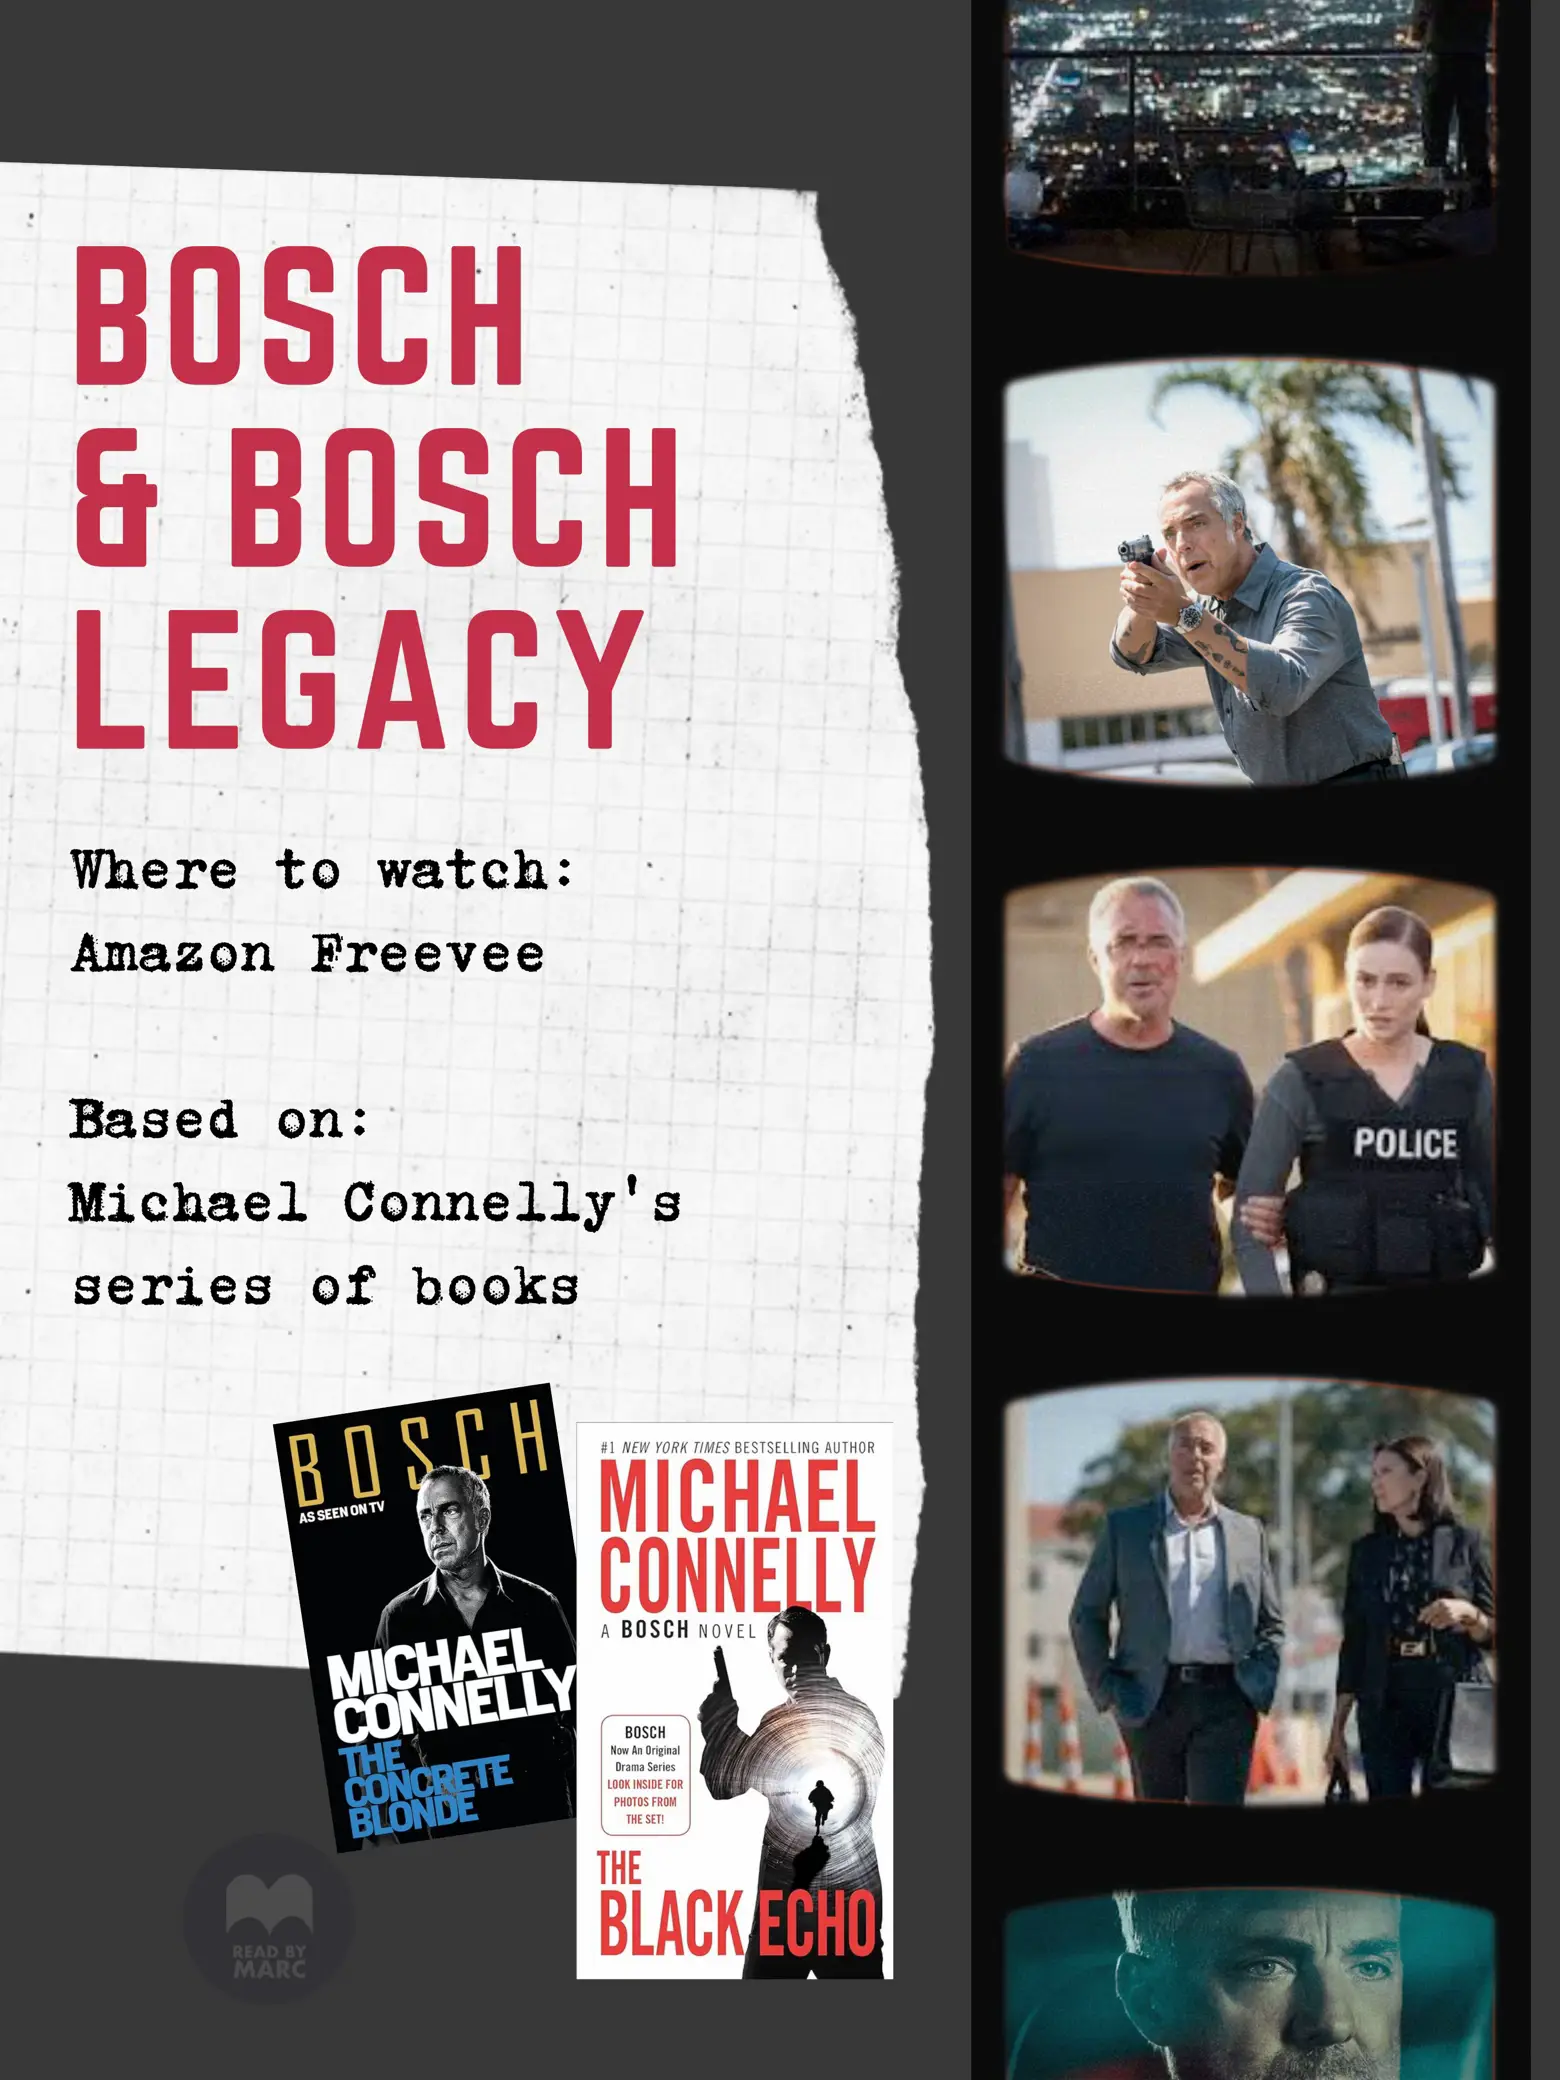 Michael Connelly proud of 'Bosch' character - The Columbian